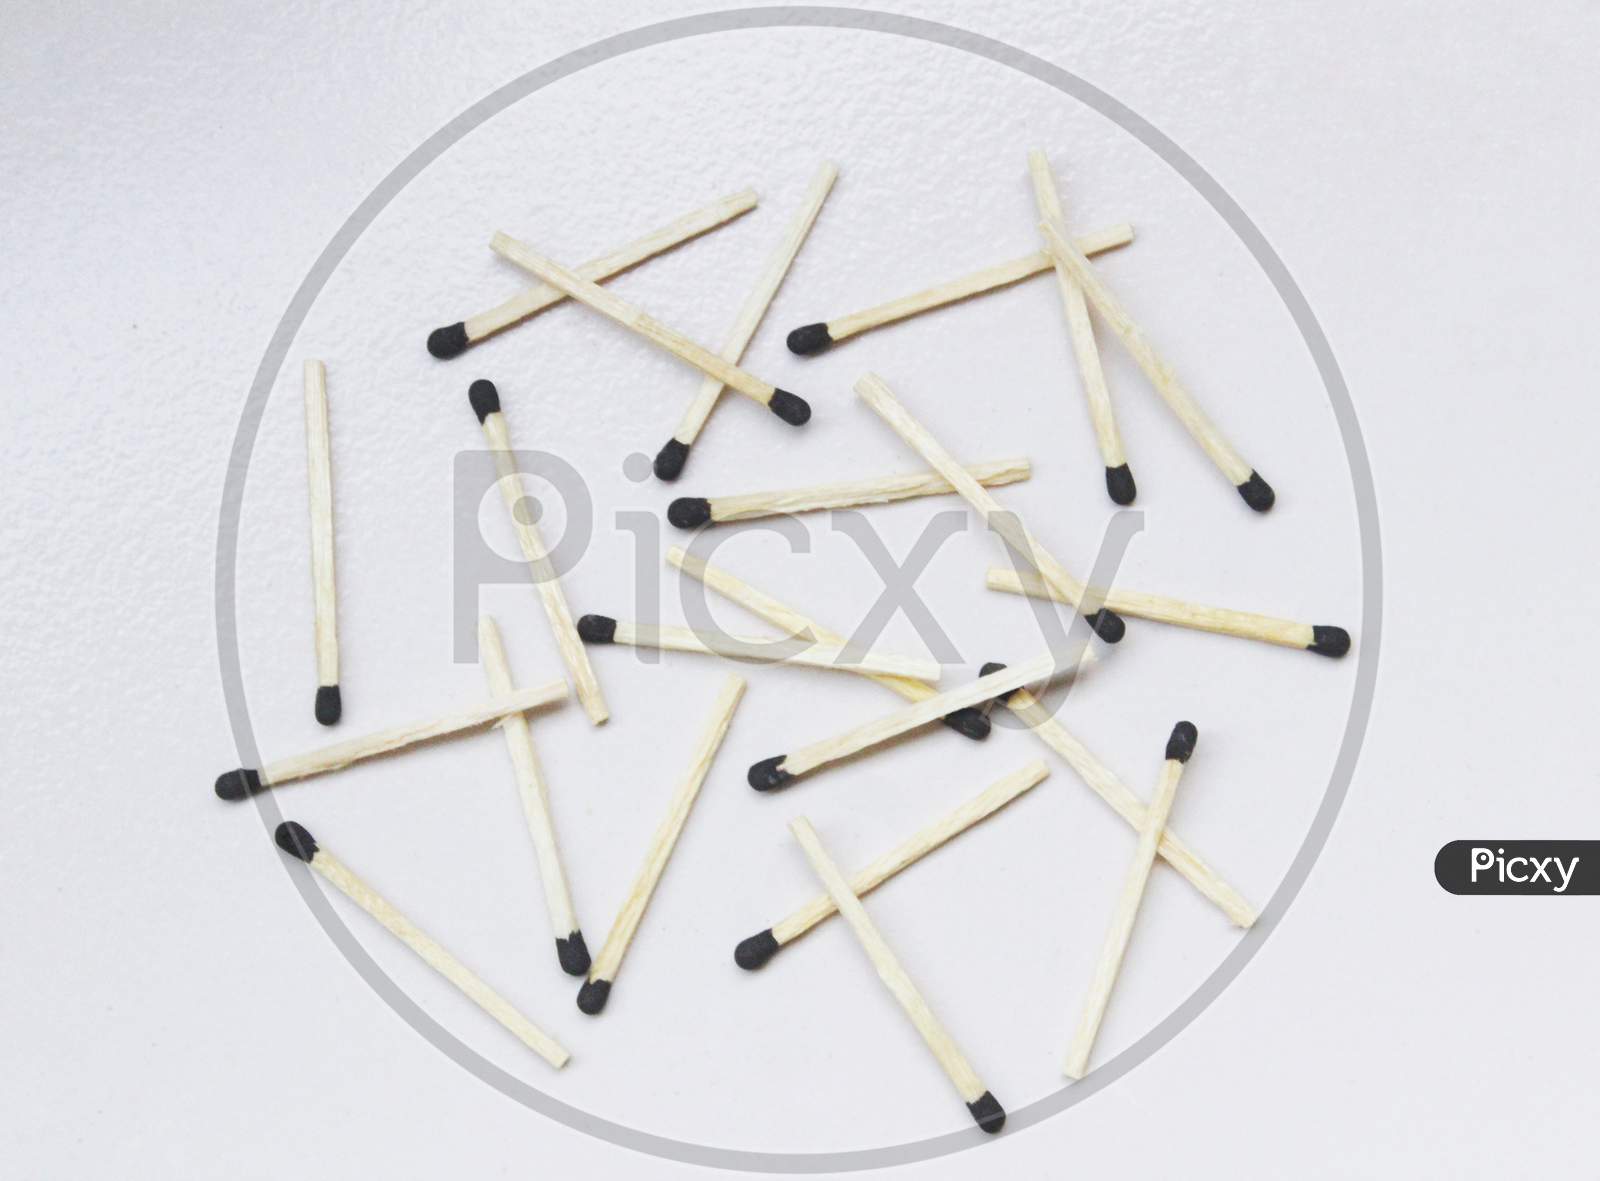 Matchstick isolate on white background